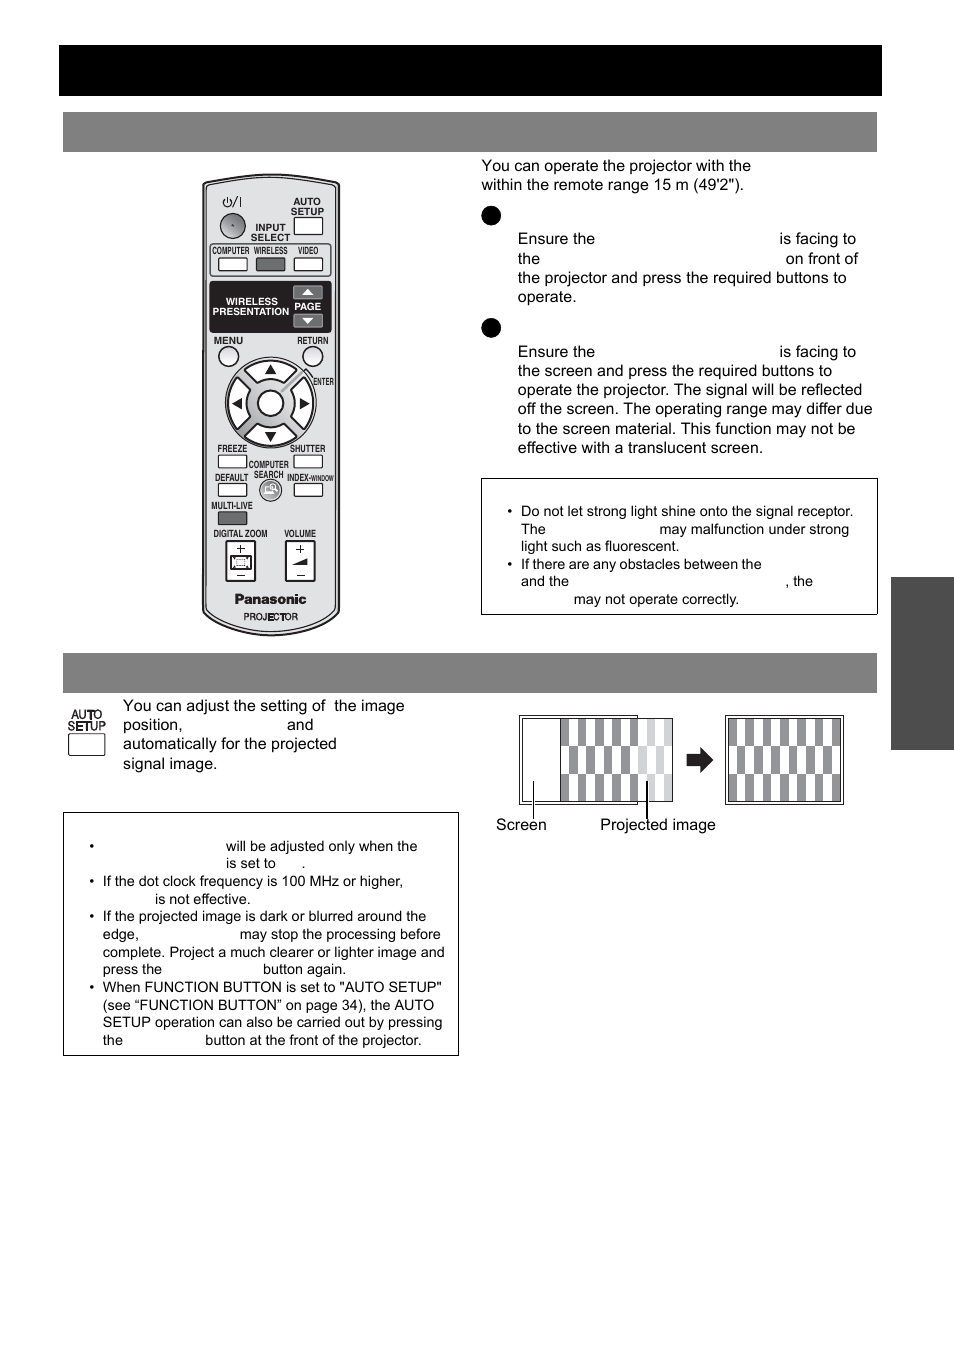 Remote control operation, Operating range, Setting up the image position automatically | Nglish - 23, Basic o p eration, Q facing to the projector, Q facing to the screen | Panasonic PT-LB51SU Manuel d'utilisation | Page 23 / 62